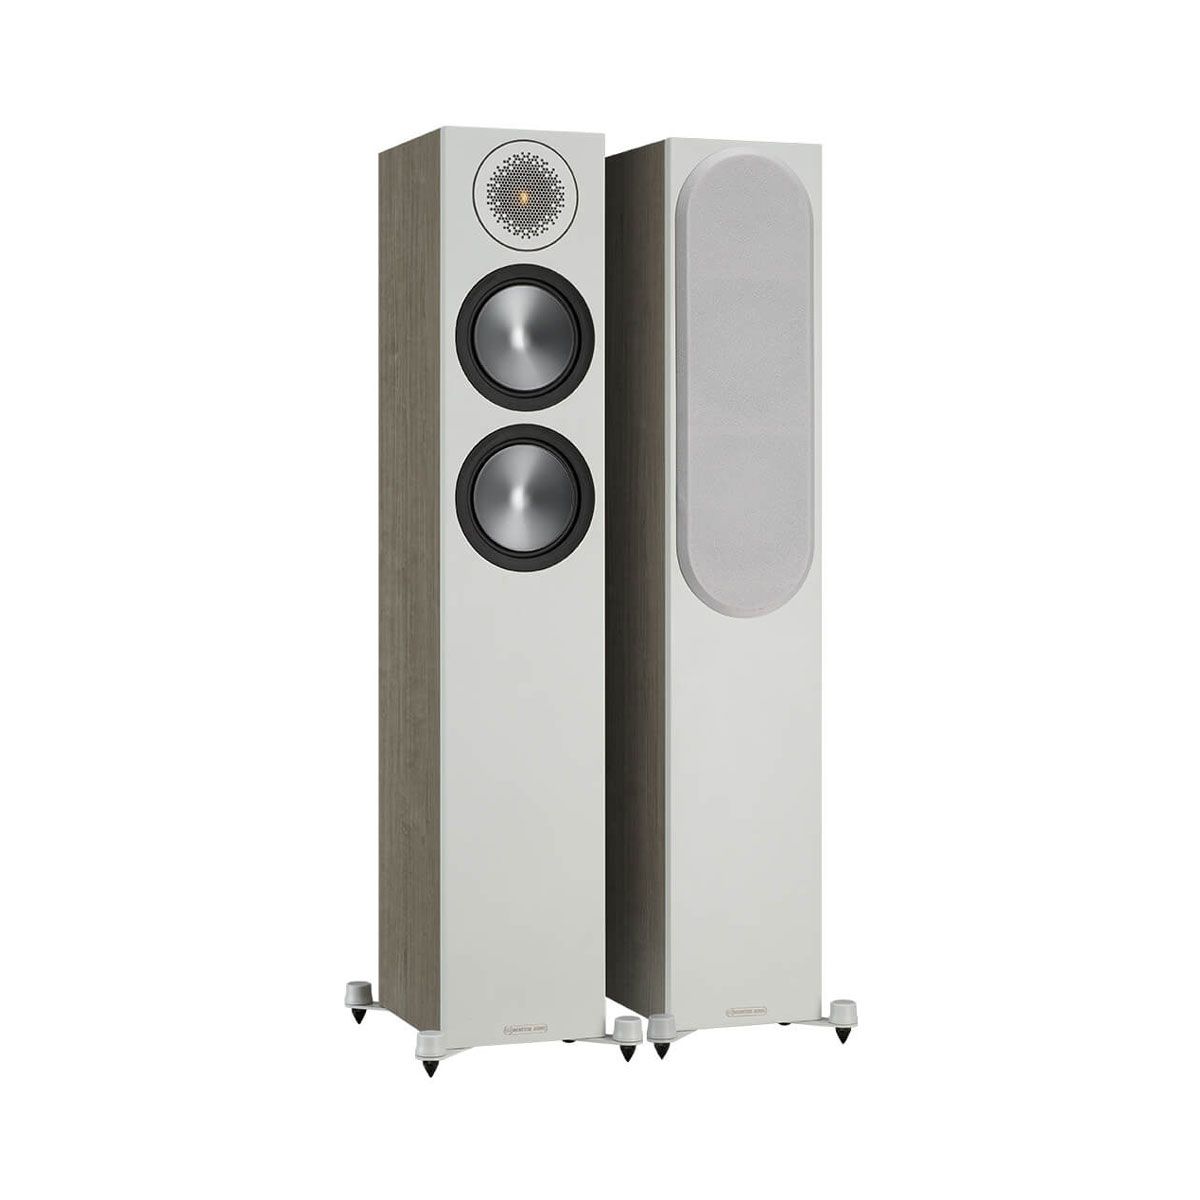 Monitor Audio Bronze 200 Floorstanding Speakers, Urban Grey, set of two, one with grille and one without grille